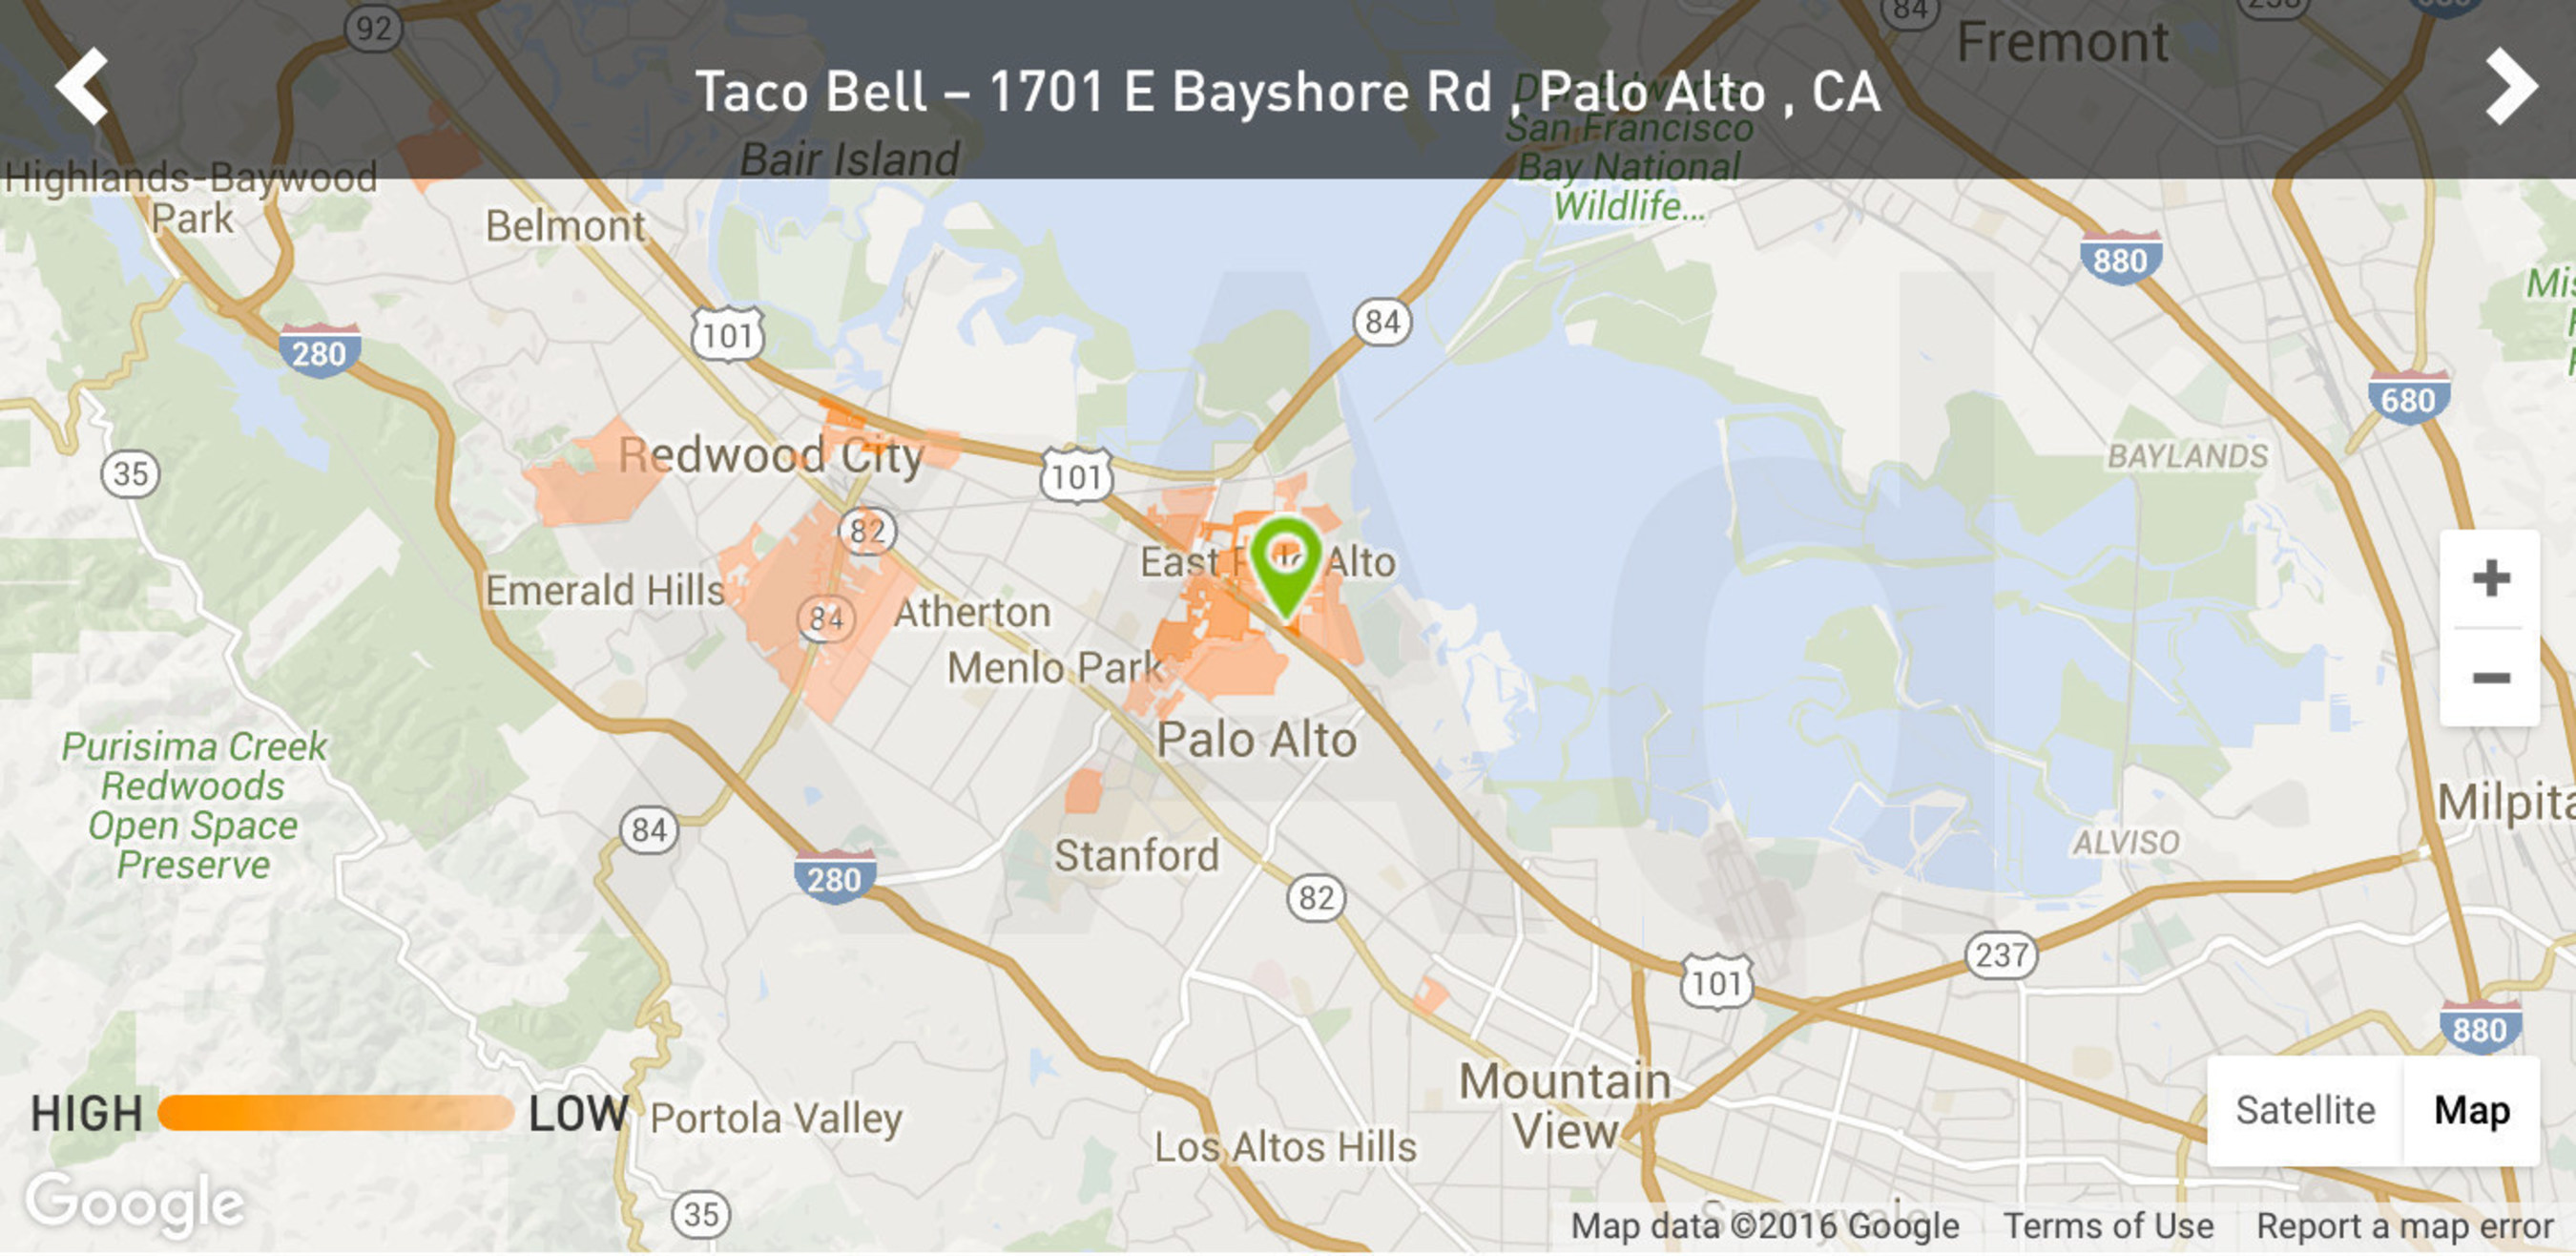 Customer Origination to a Palo Alto Taco Bell -- Source: xAd MarketPlace Discovery